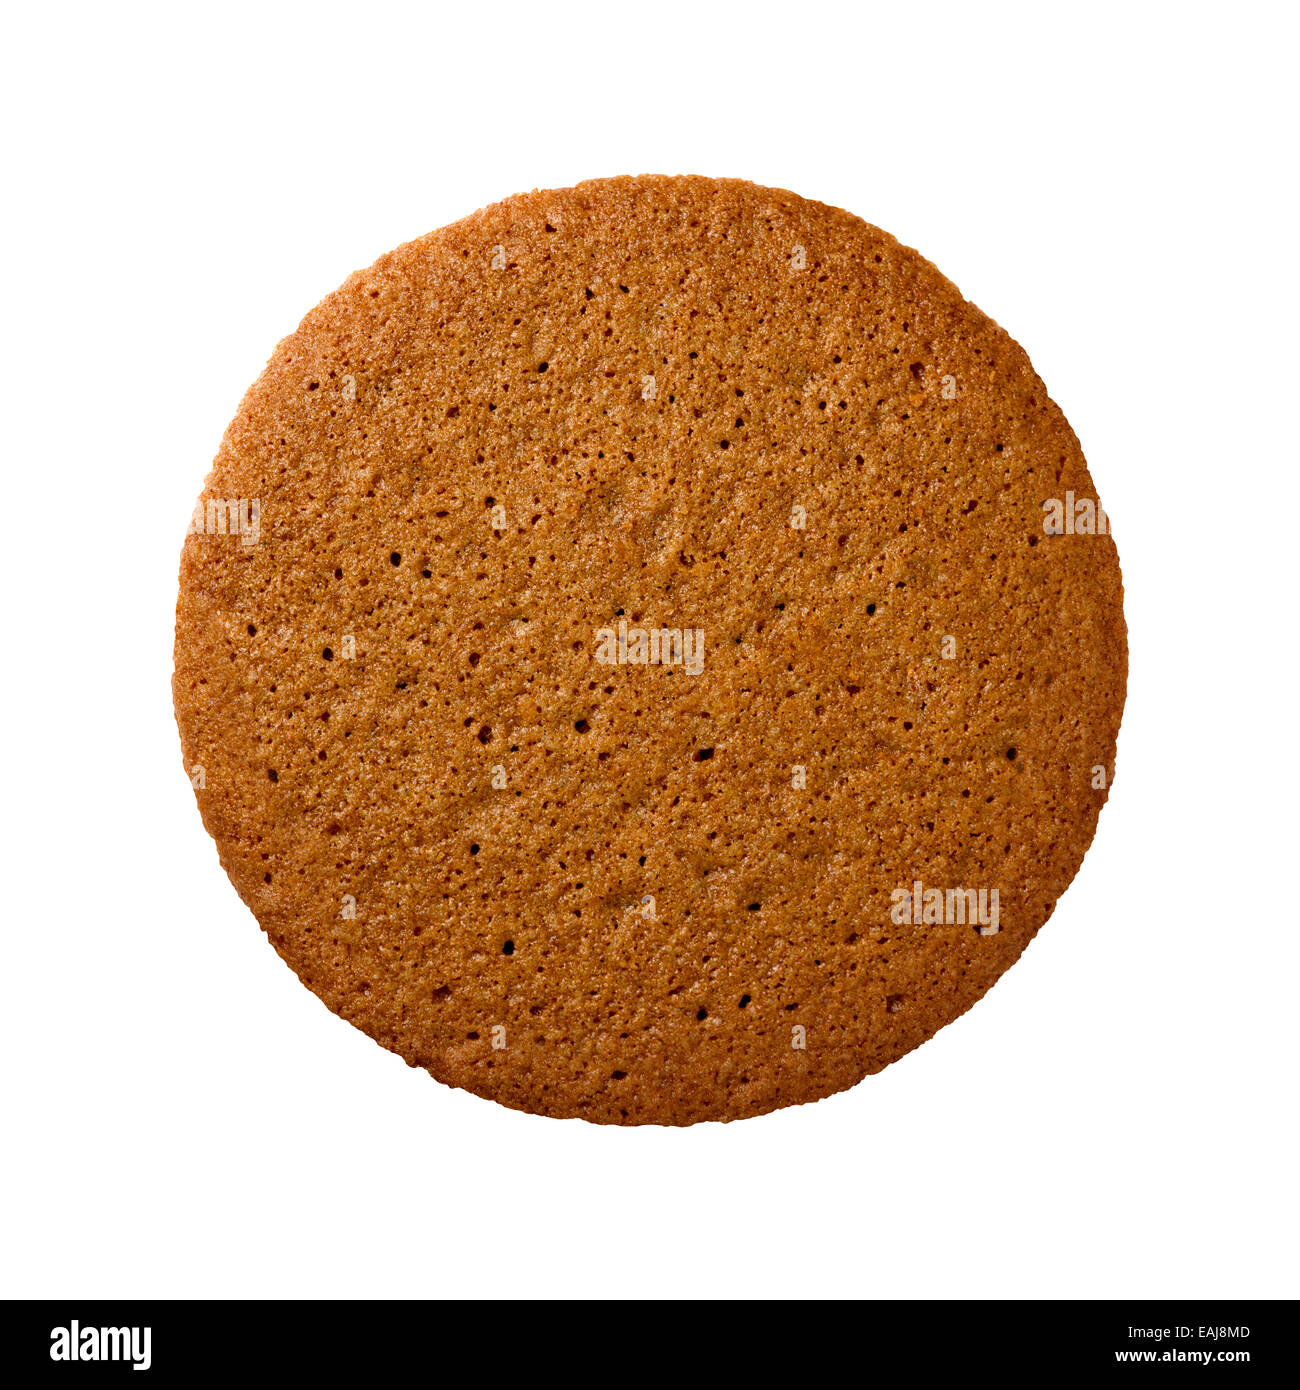 Aerial view of a single brown ginger snap cookie or biscuit. Stock Photo